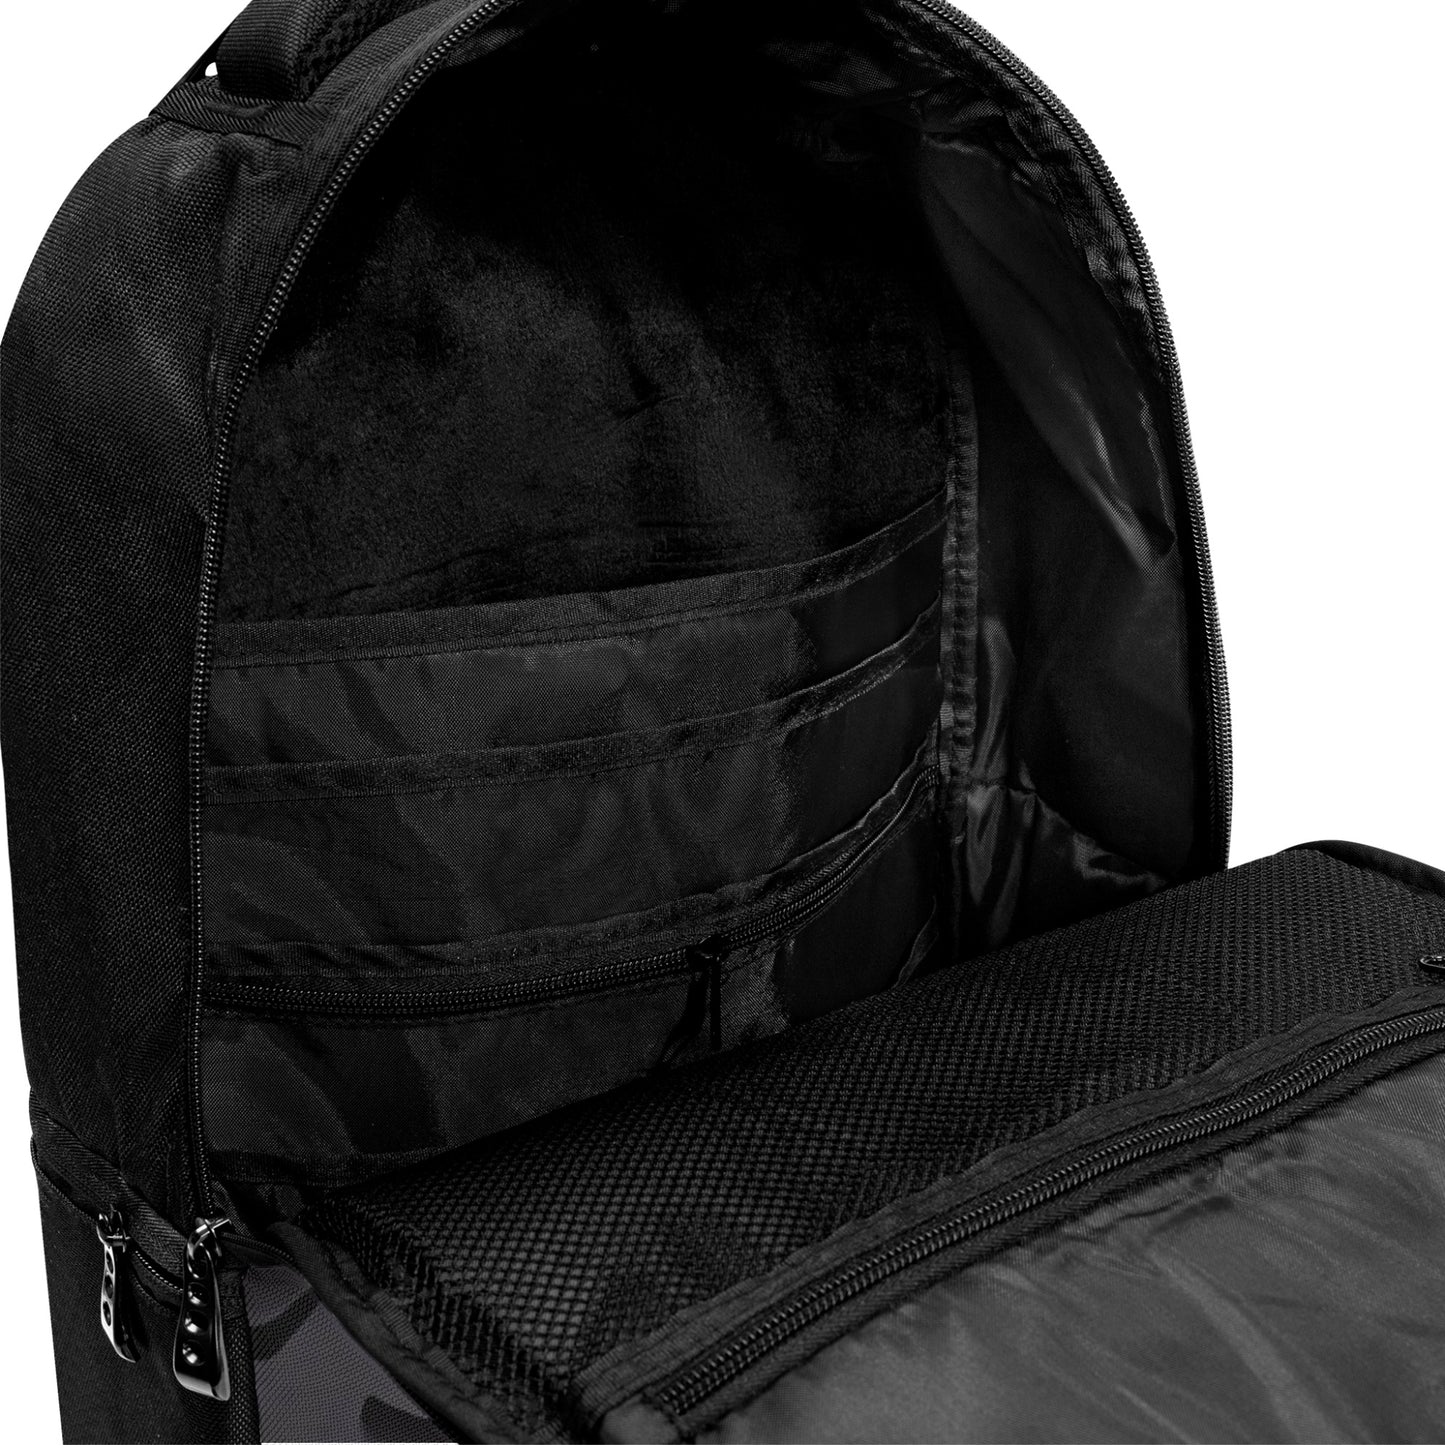 The B.E. Style Brand Camo Grind Laptop Pack